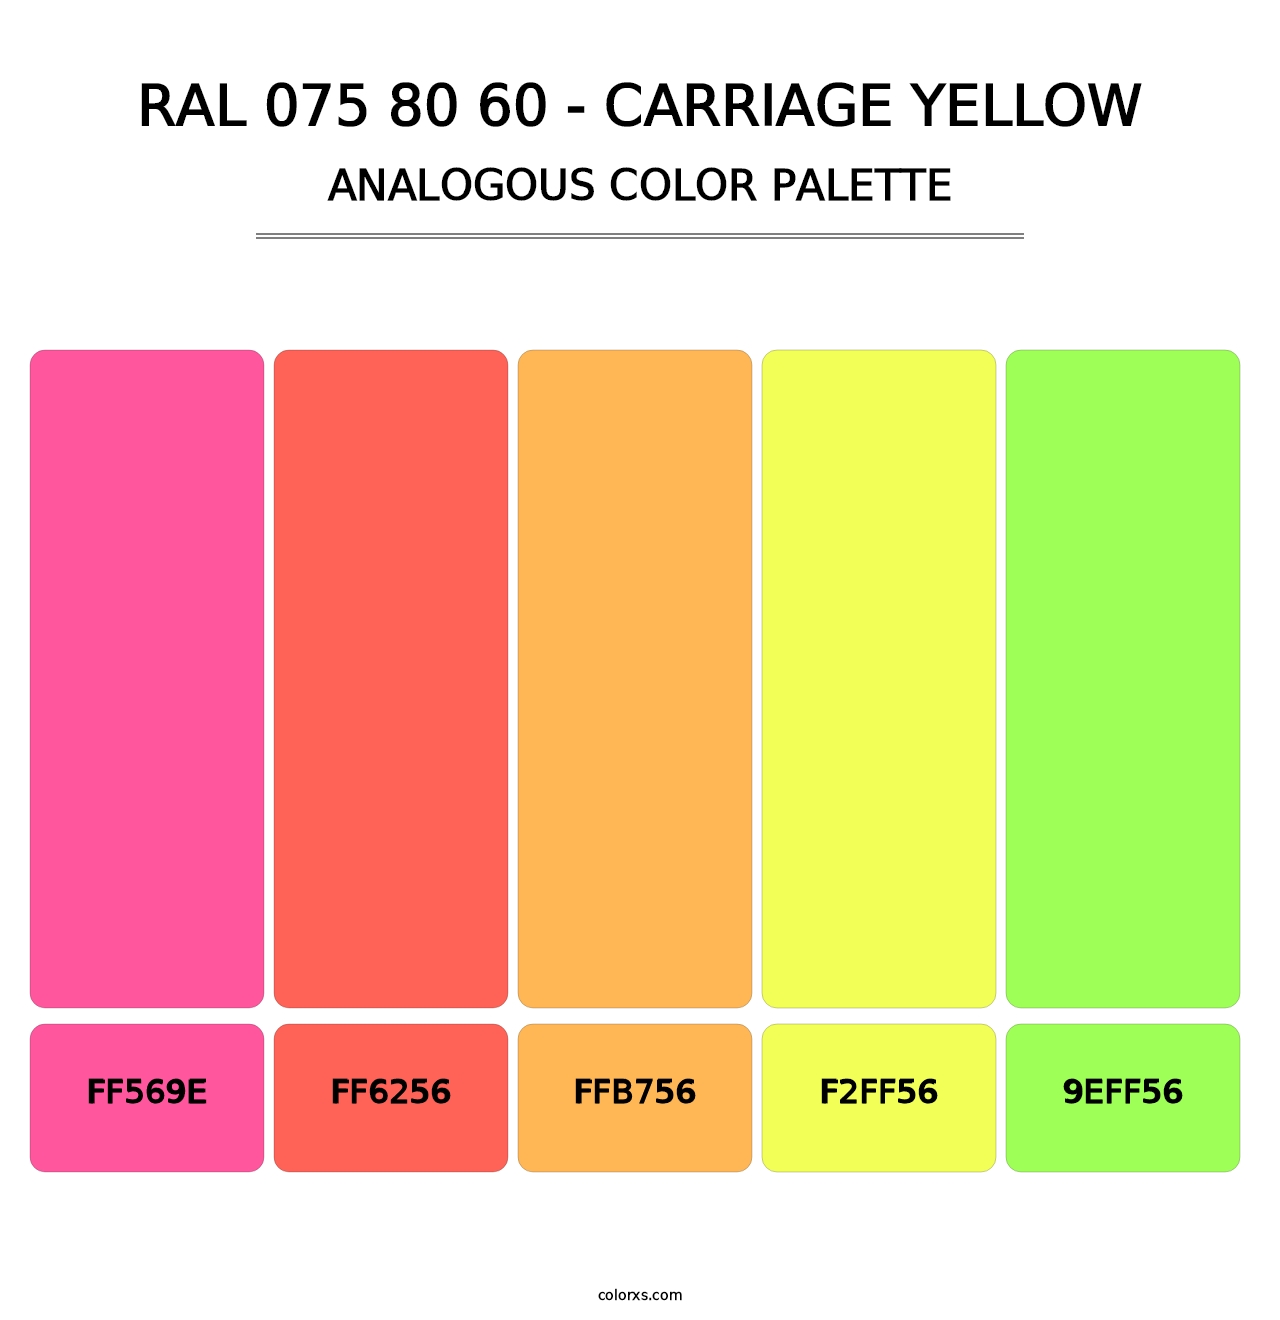 RAL 075 80 60 - Carriage Yellow - Analogous Color Palette